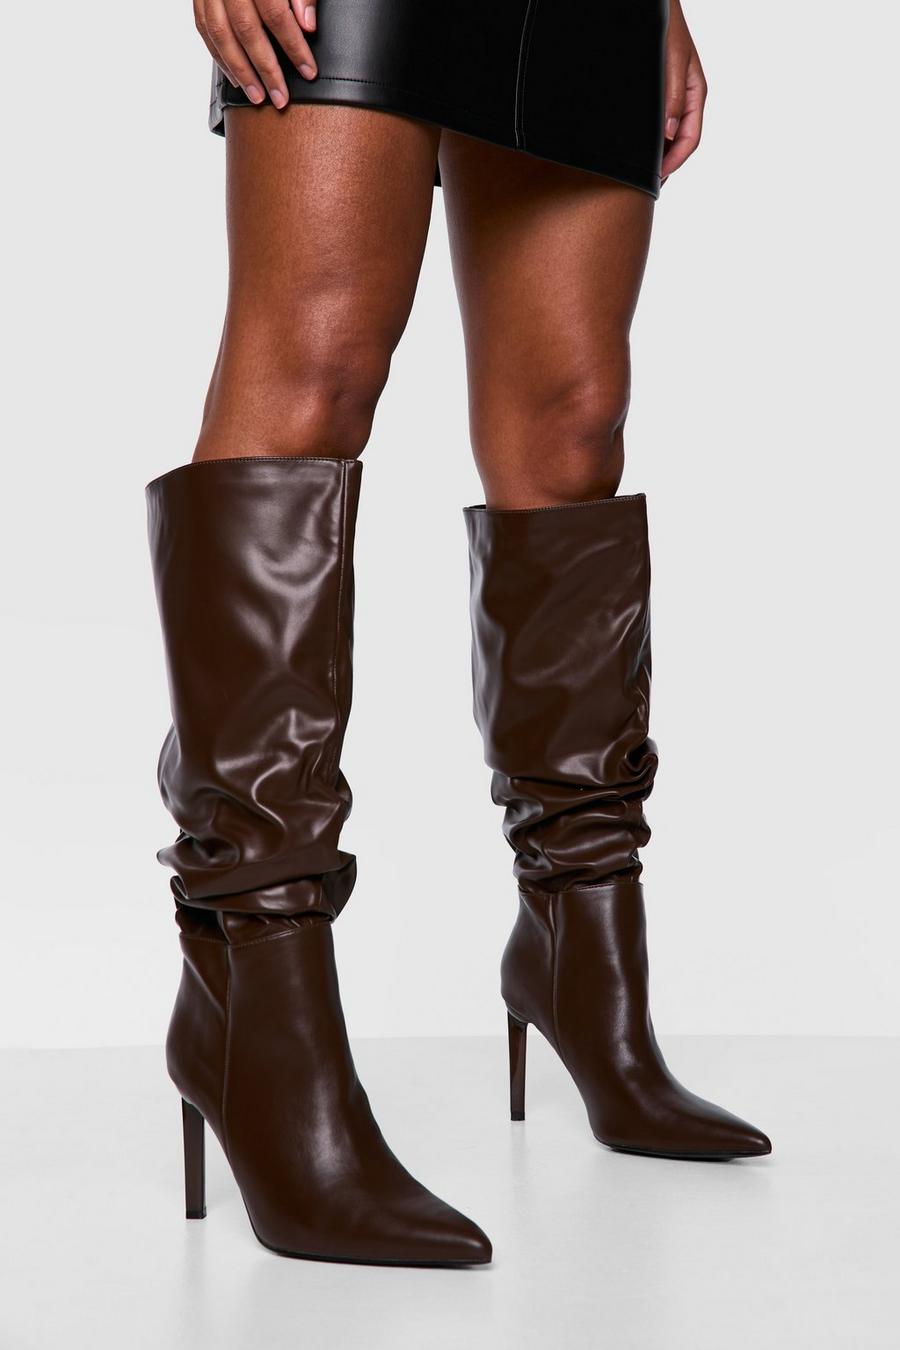 Chocolate Wide Width Ruched Stiletto Pointed Toe Boots image number 1